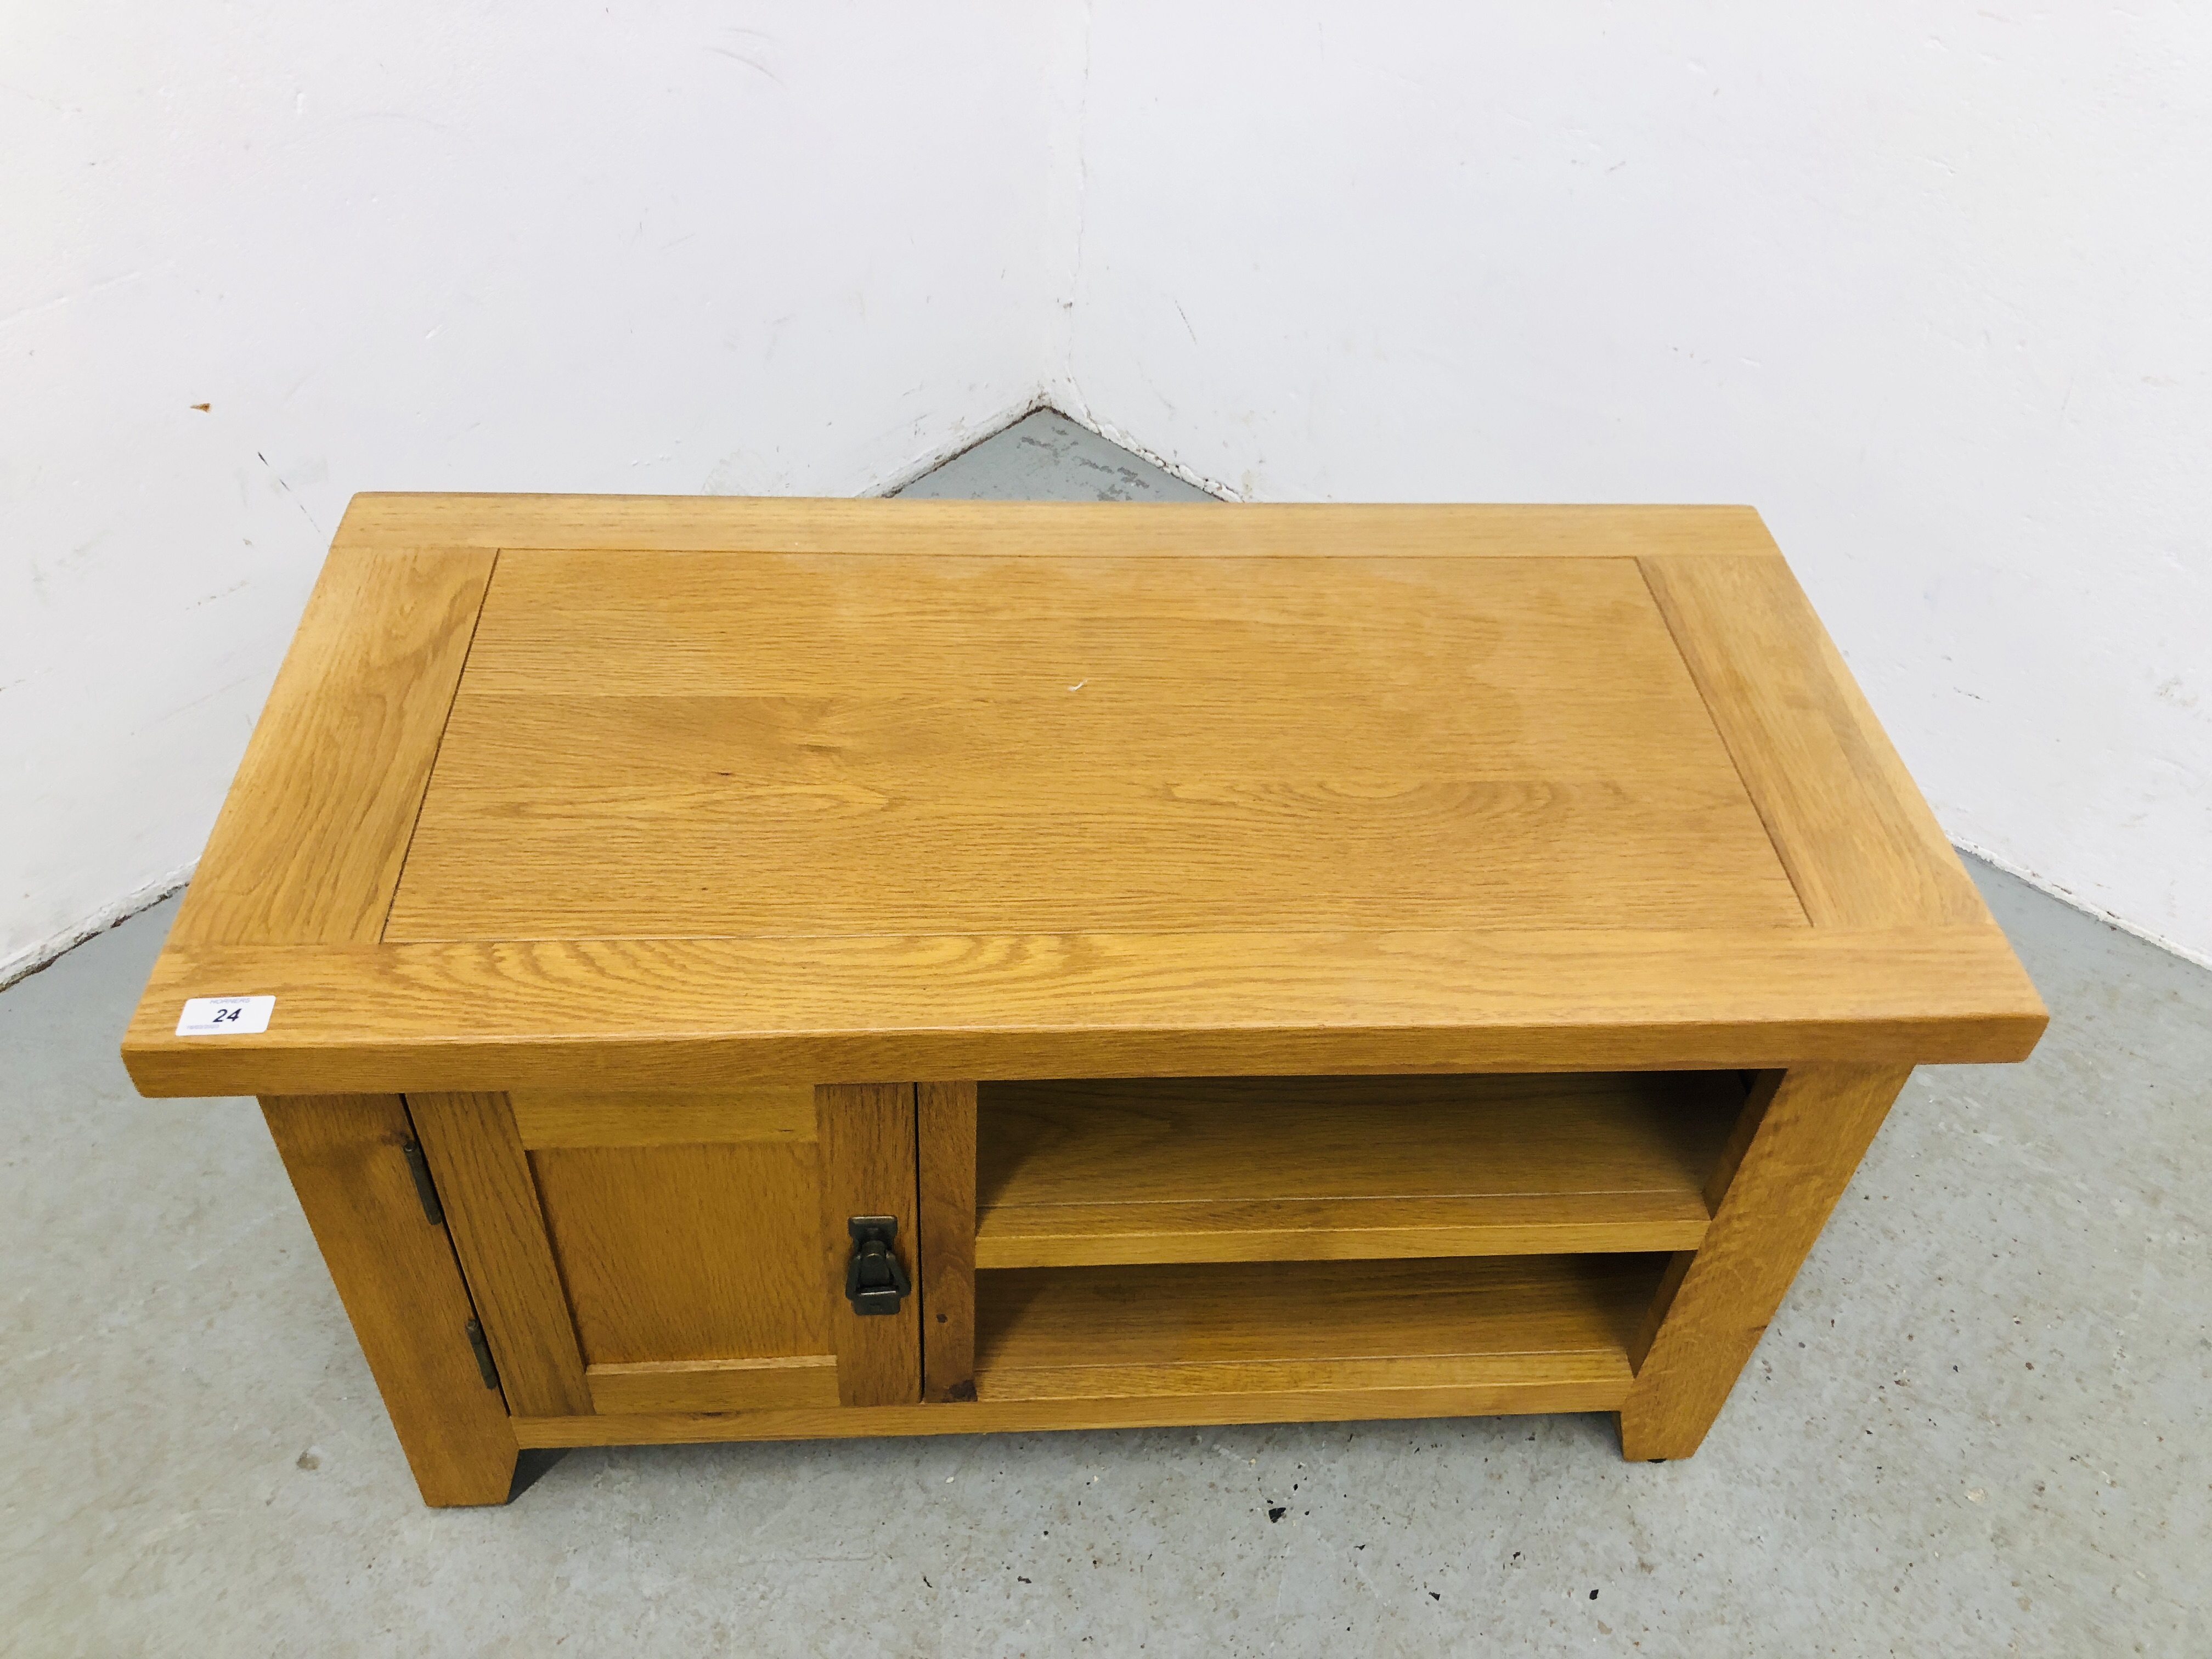 A MODERN SOLID OAK TV STAND WITH SINGLE DOOR W 90CM X D 44CM X H 51CM. - Image 2 of 5